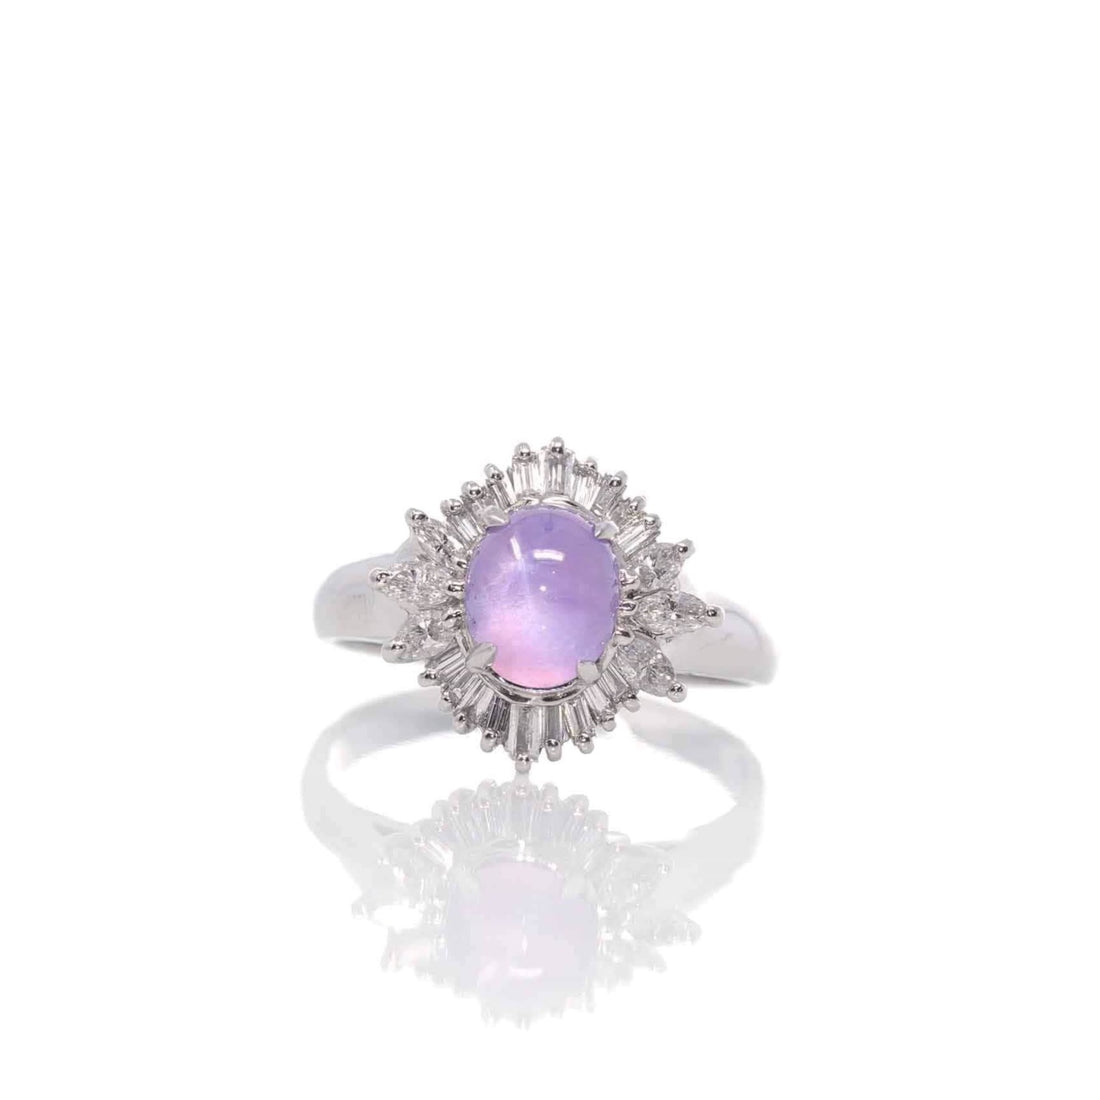 Buy Pink Star Sapphire Ring, 925 Sterling Silver Ring, Linde Star Sapphire  Ring, Pink Linde Star Sapphire, Lab Grown Pink Sapphire Ring for Gift  Online in India - Etsy